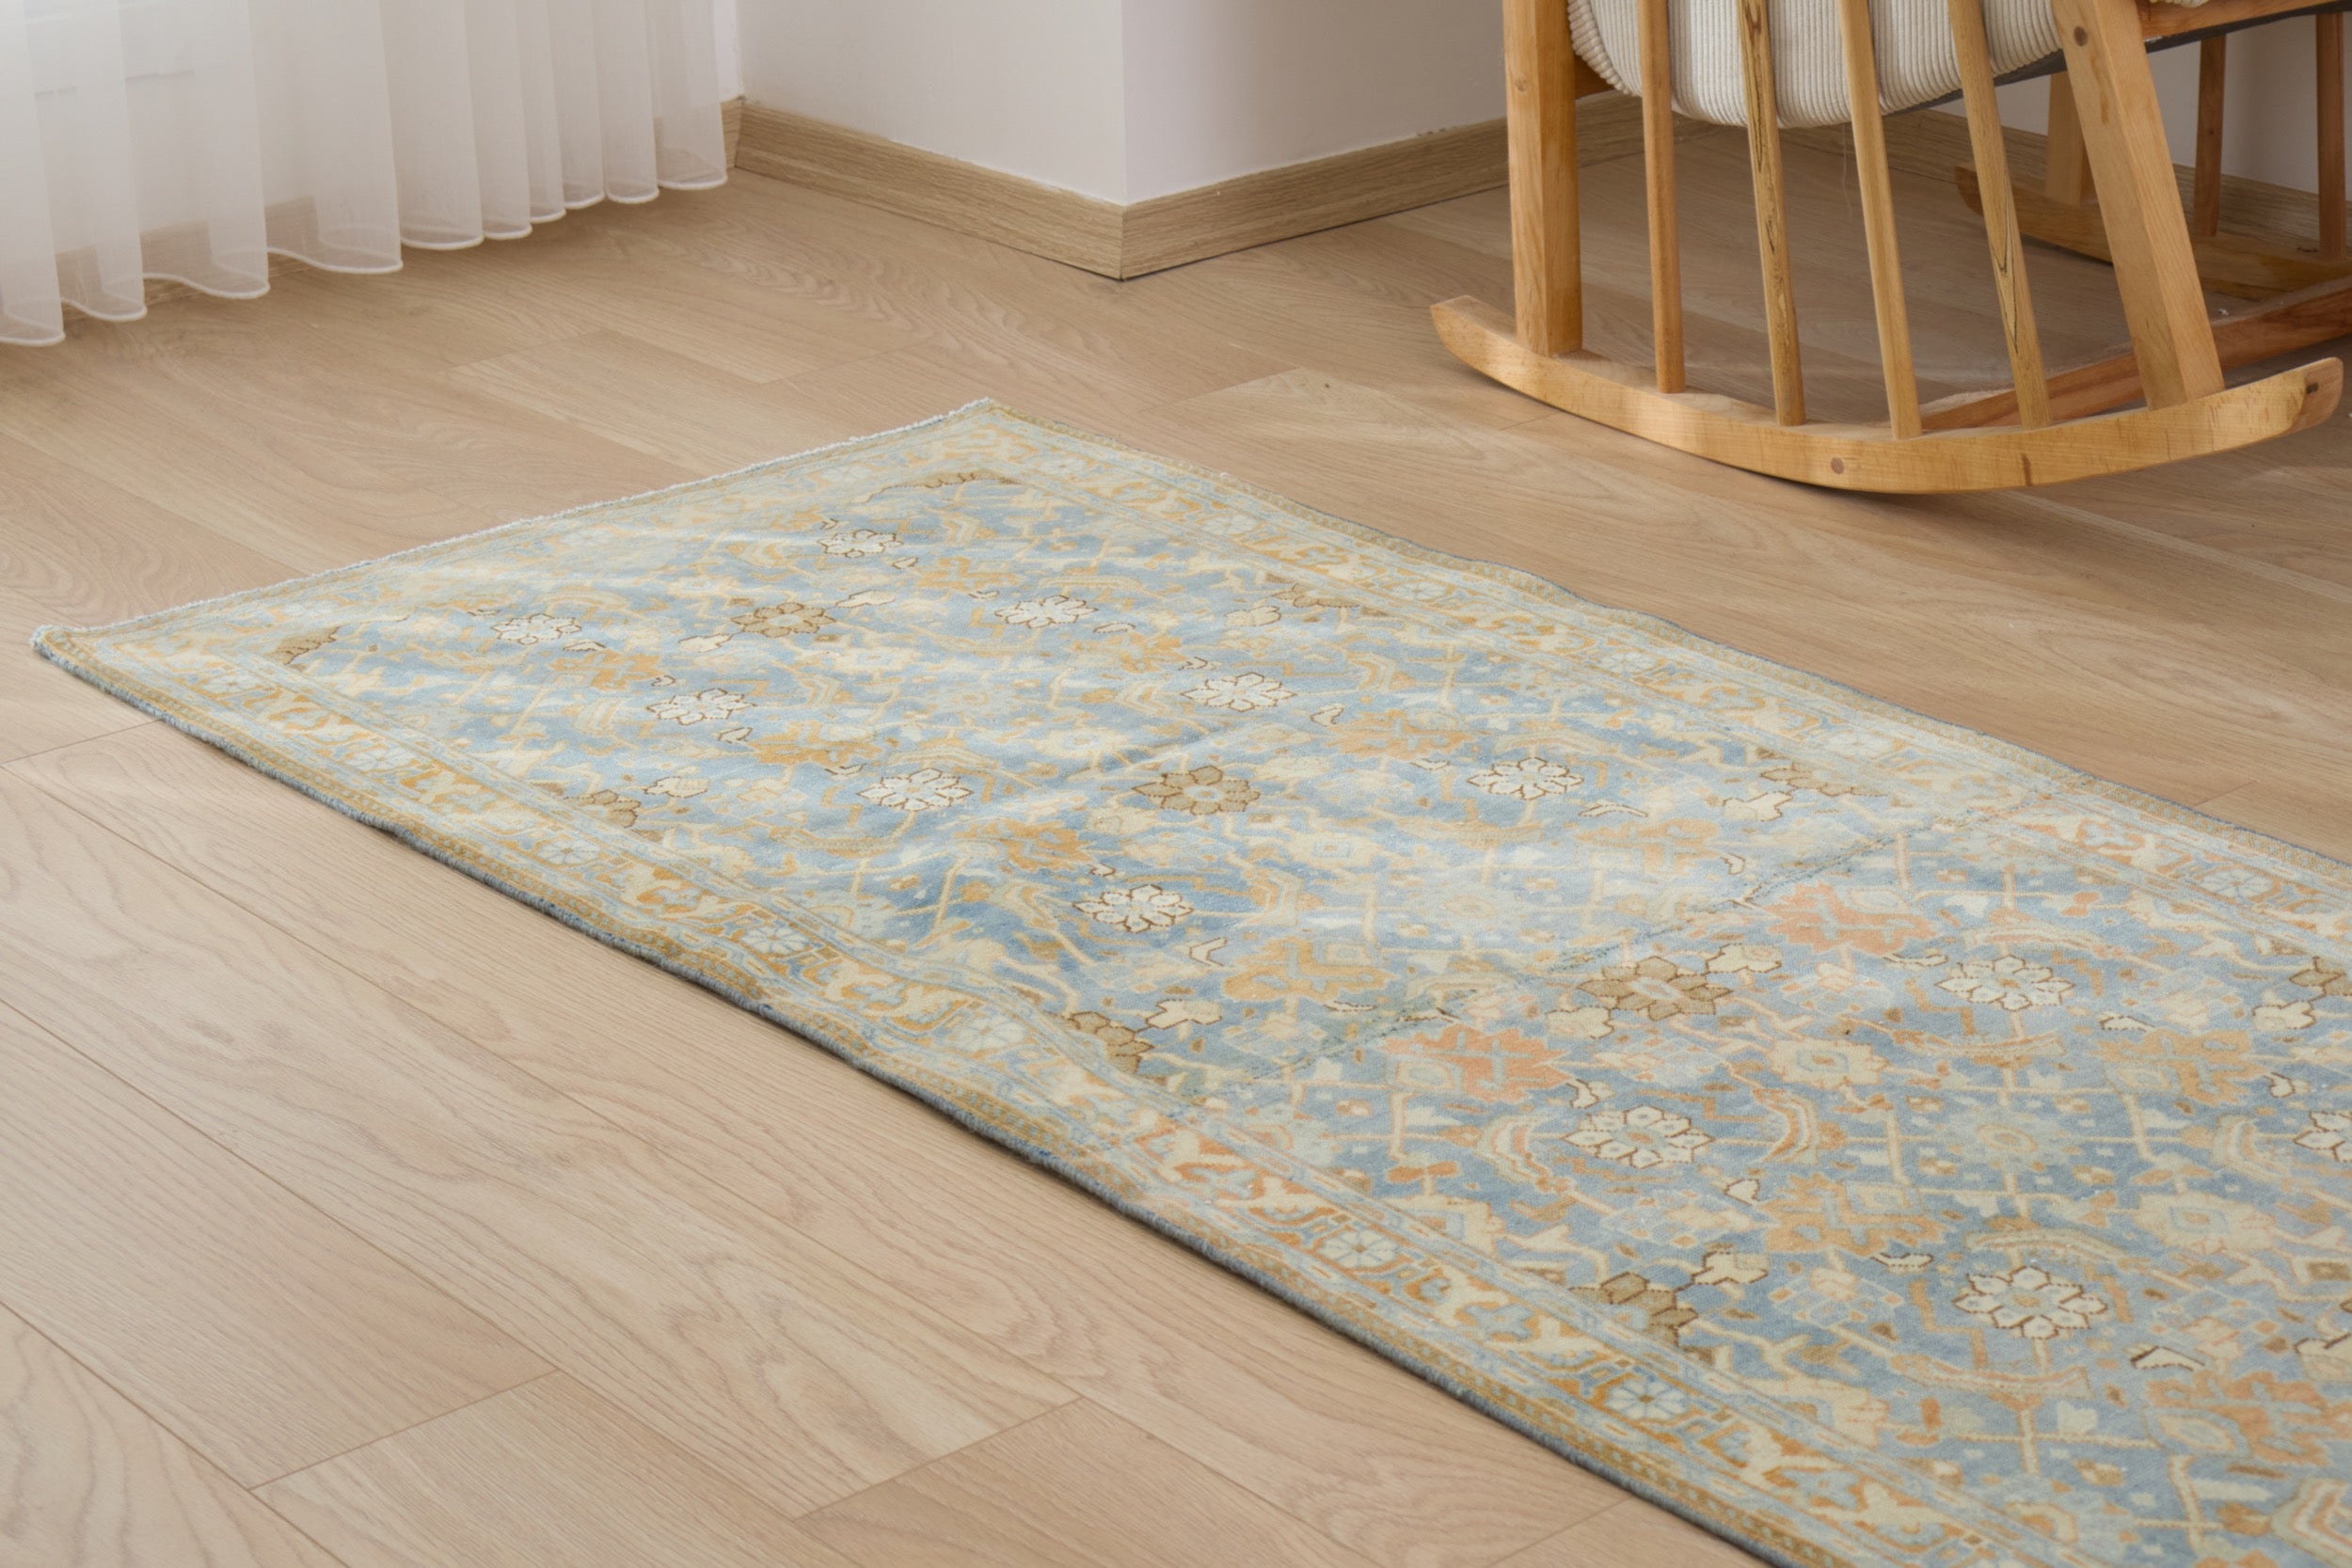 Nannie | Classic Beauty of Hand-Knotted Persian Carpets | Kuden Rugs